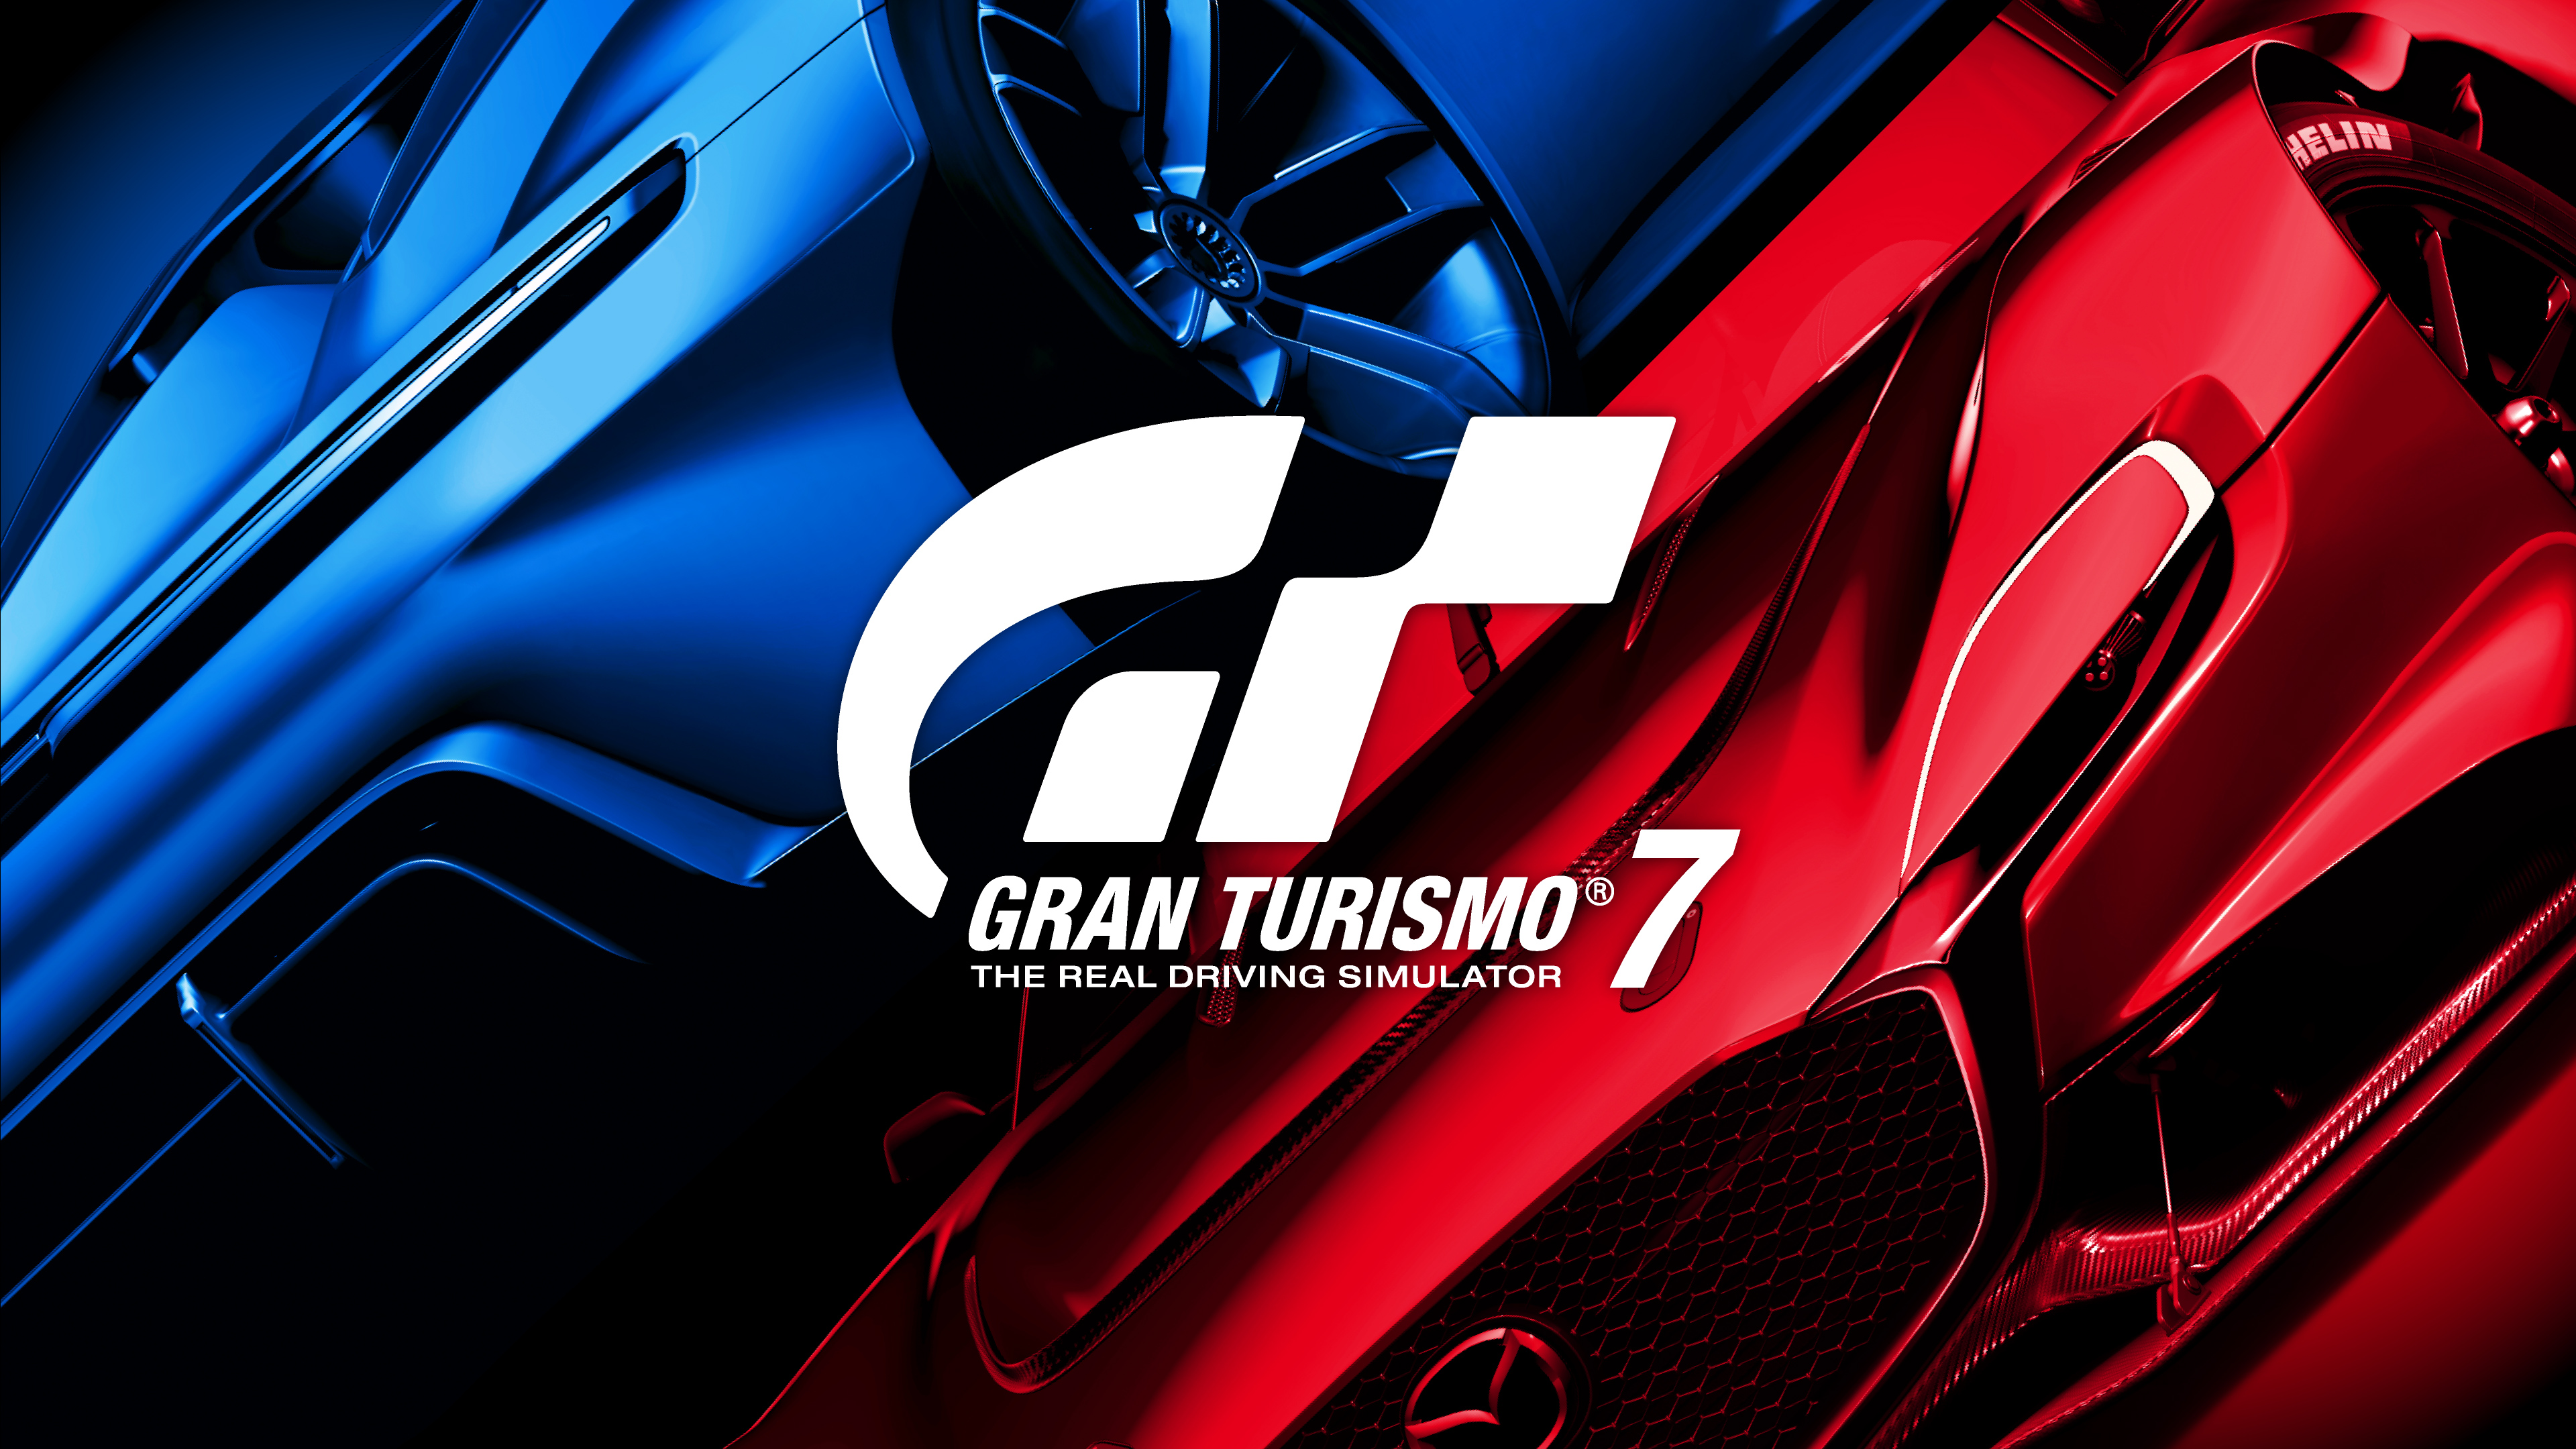 Download Gran Turismo 7 wallpapers for mobile phone free Gran Turismo 7  HD pictures